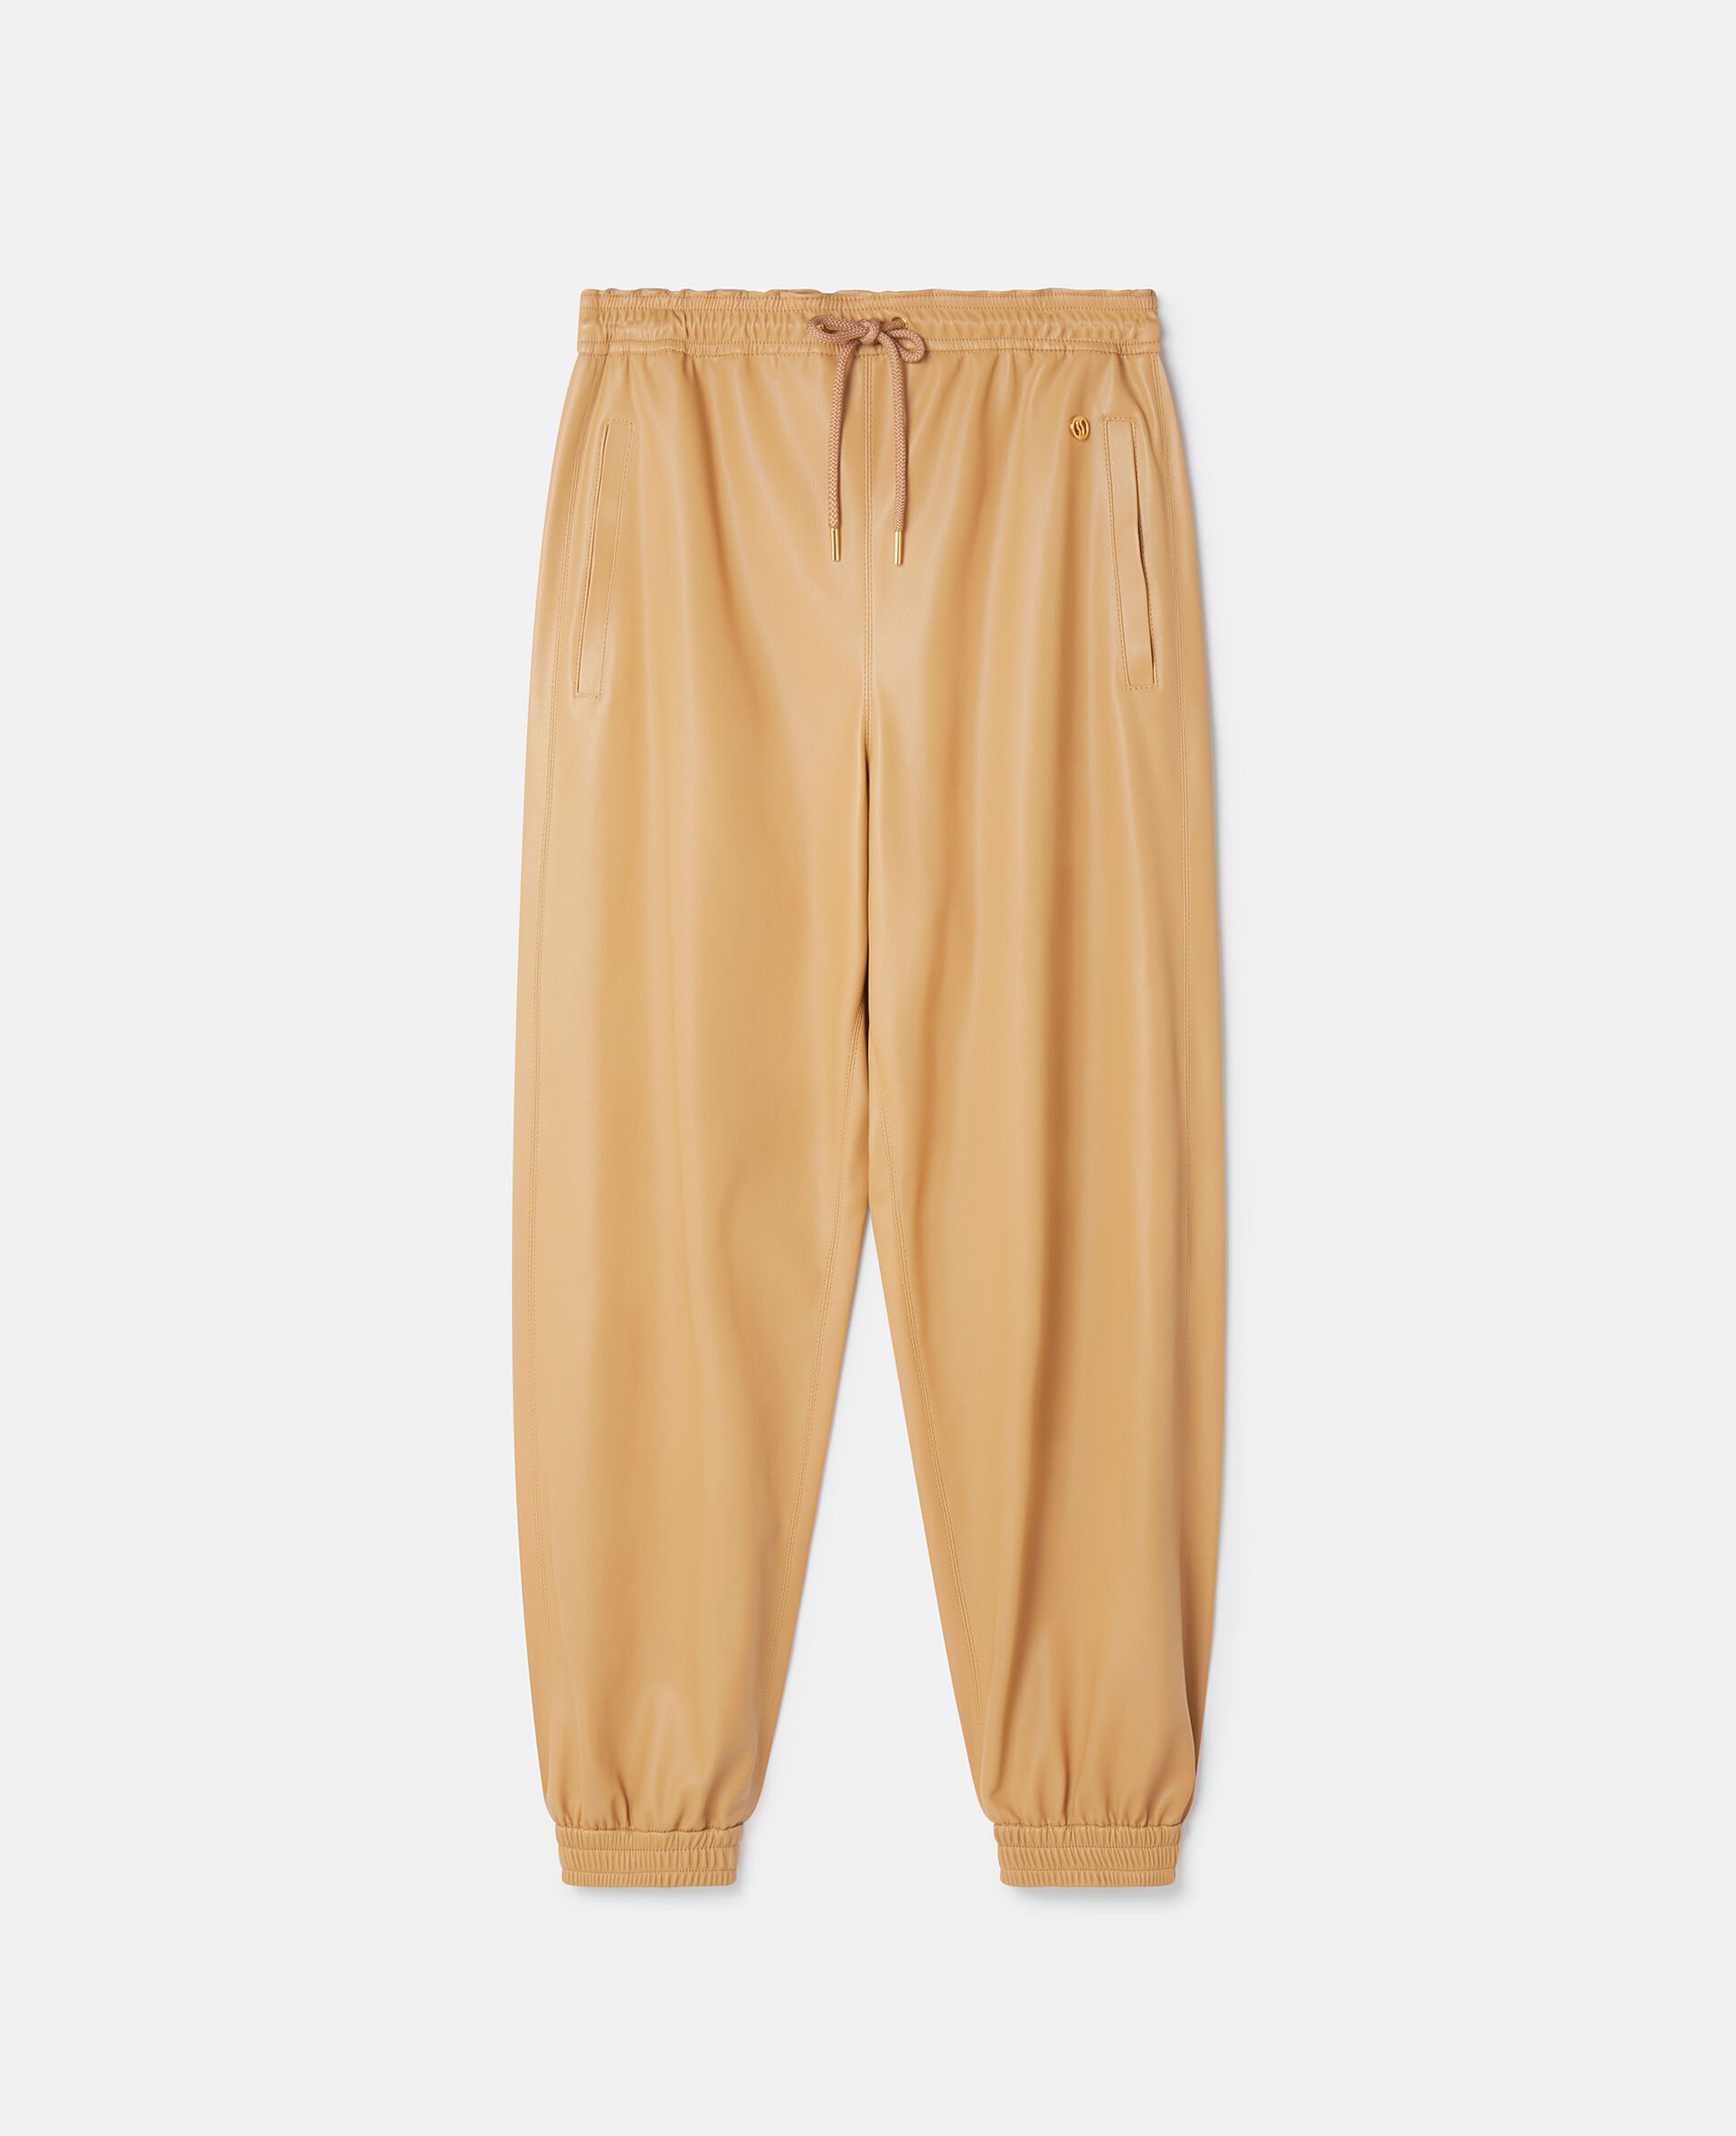 Alter Mat Cuffed Trousers-Brown-large image number 0